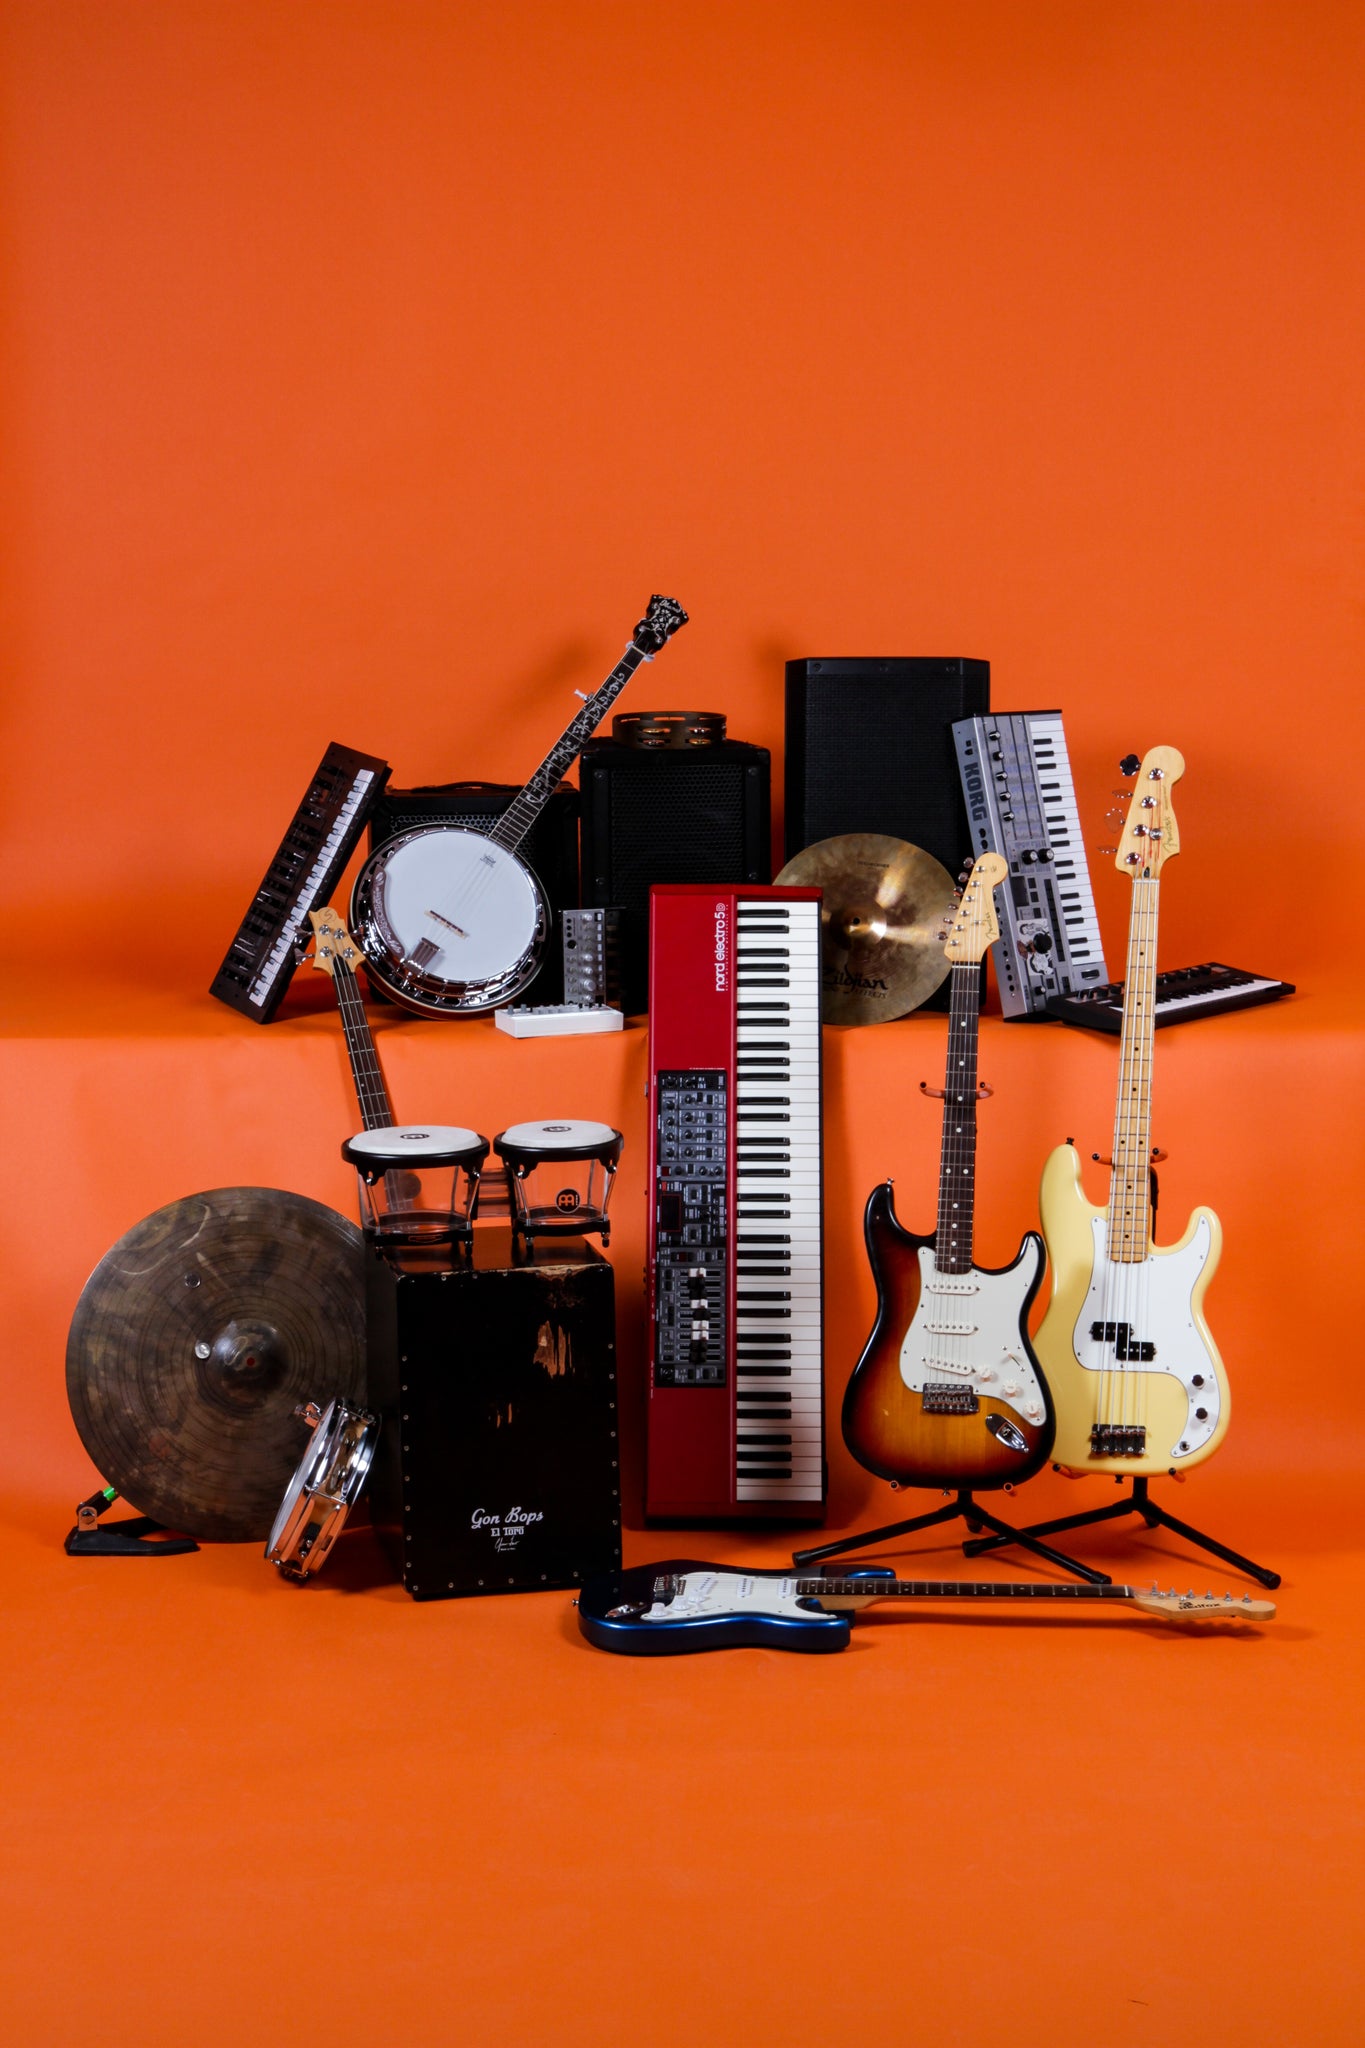 keyboards, guitars, amps, percussion instruments arranged in front of an orange background